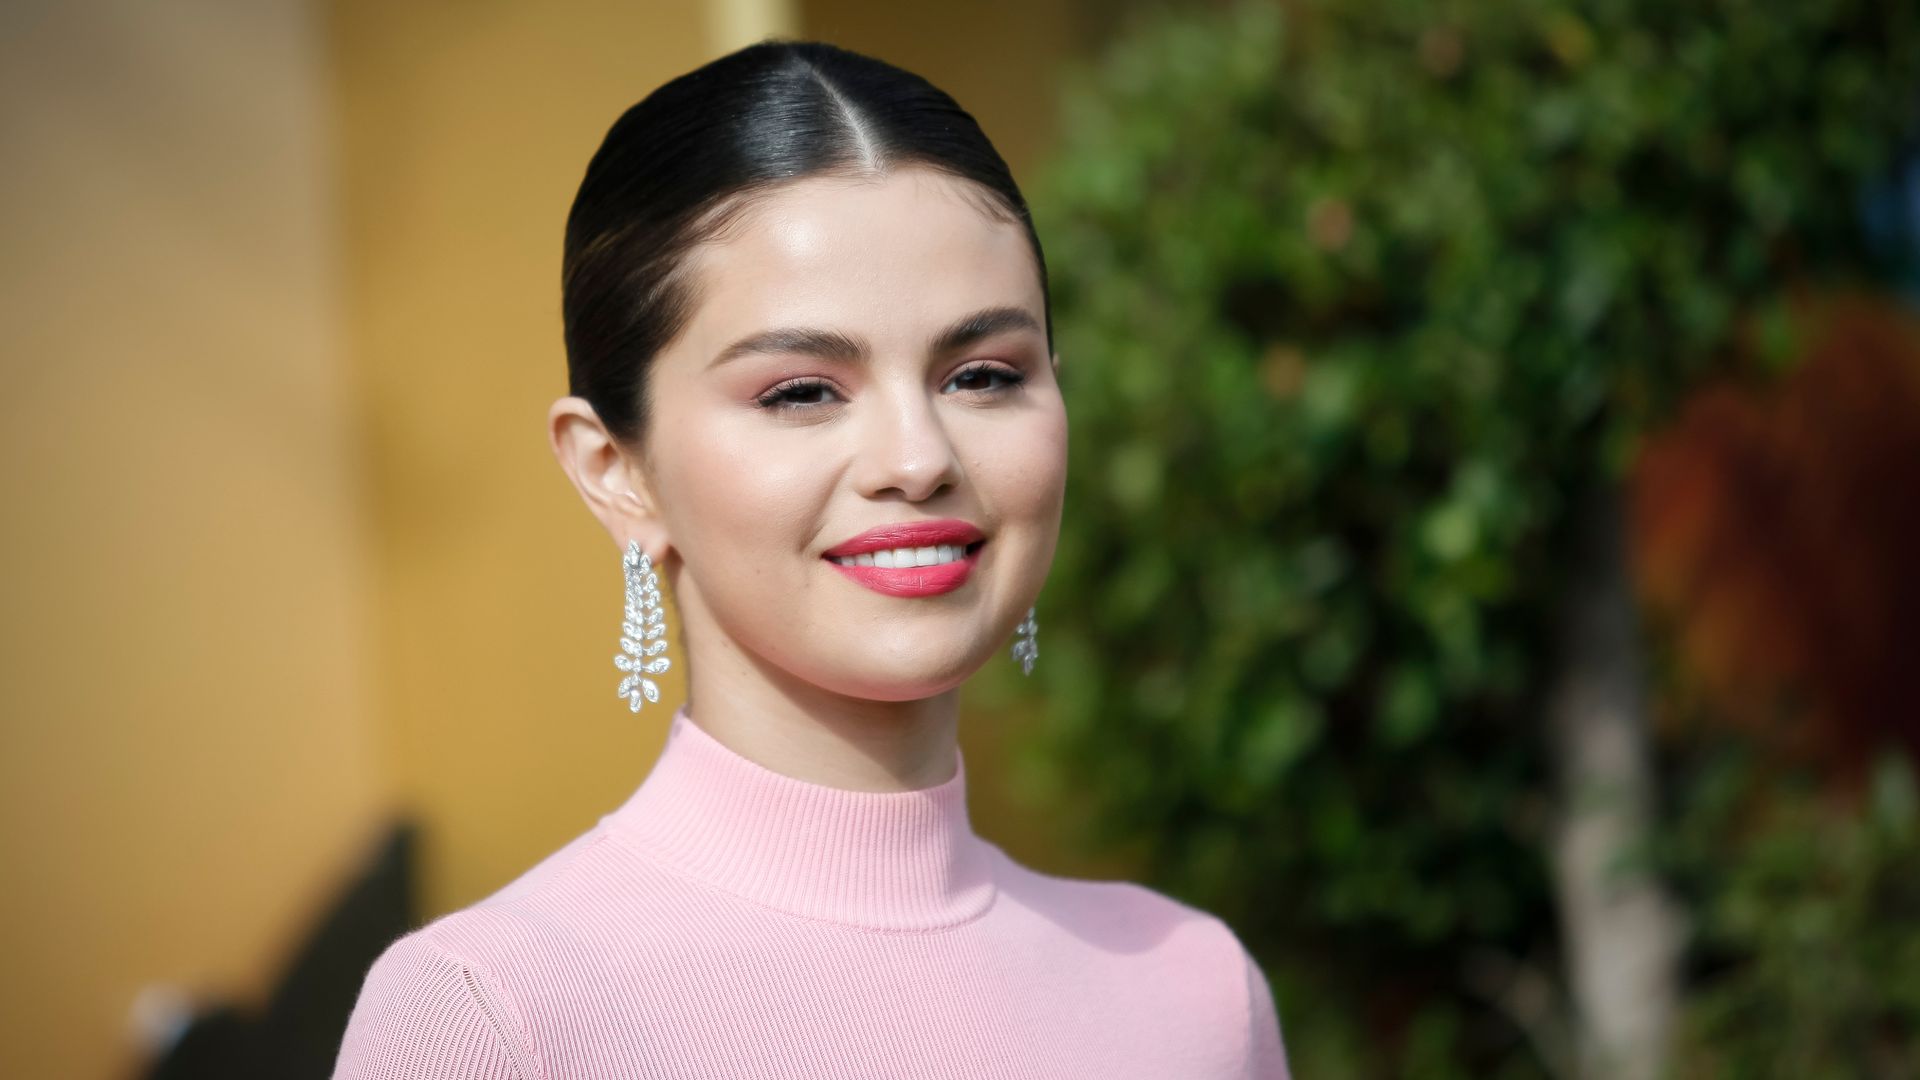 Selena Gomez wearing a pink high neck top and dazzling earrings 